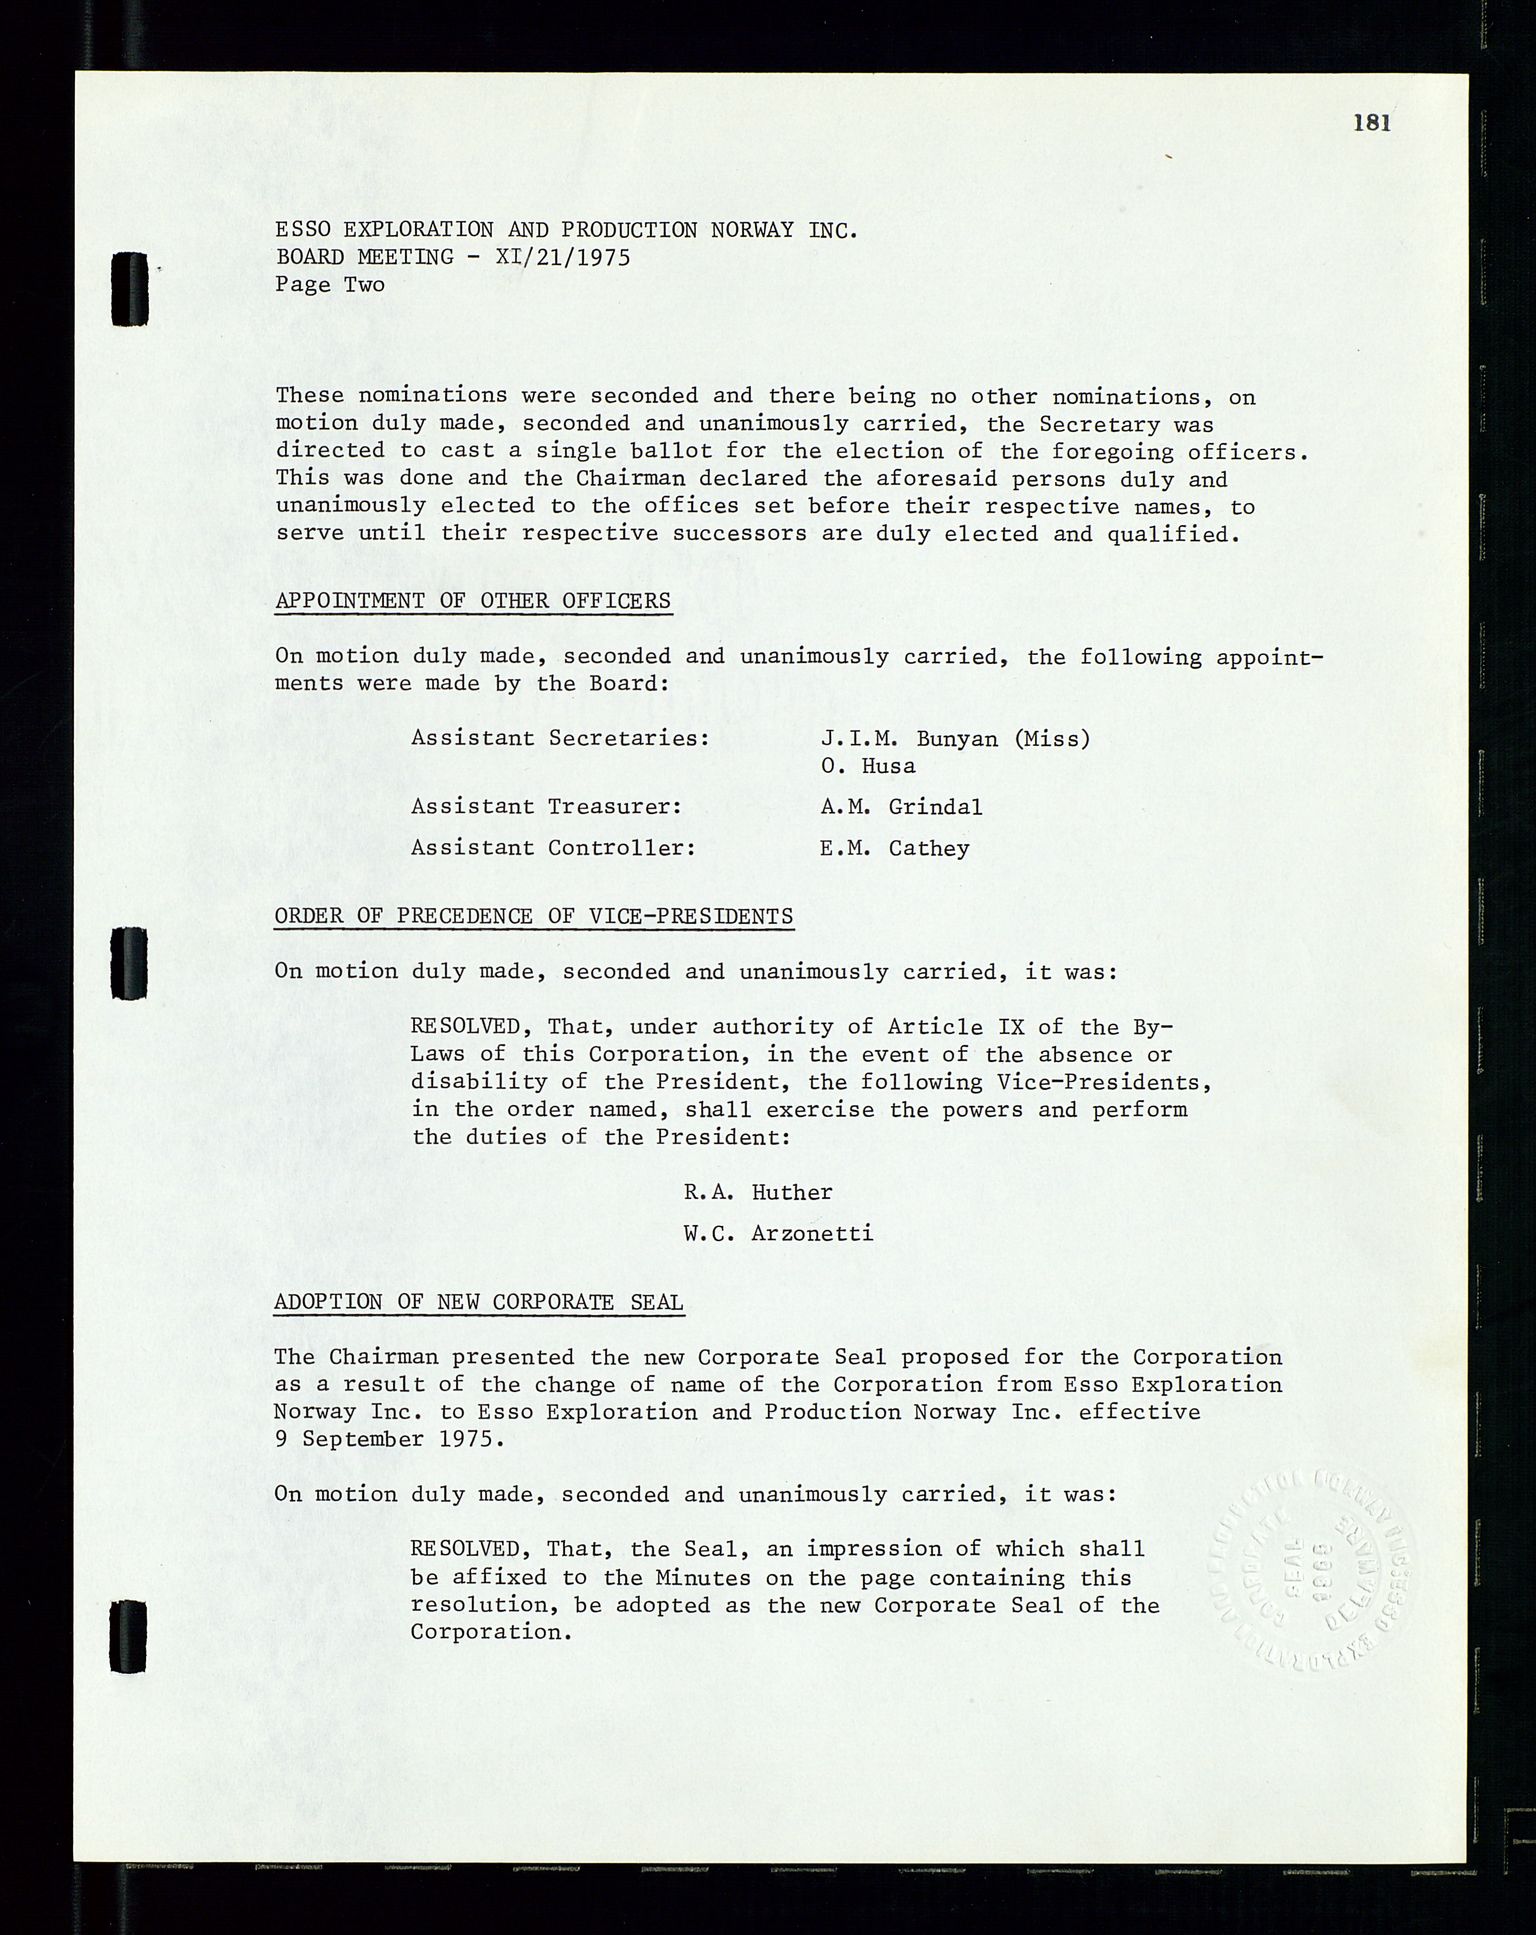 Pa 1512 - Esso Exploration and Production Norway Inc., SAST/A-101917/A/Aa/L0001/0002: Styredokumenter / Corporate records, Board meeting minutes, Agreements, Stocholder meetings, 1975-1979, s. 19